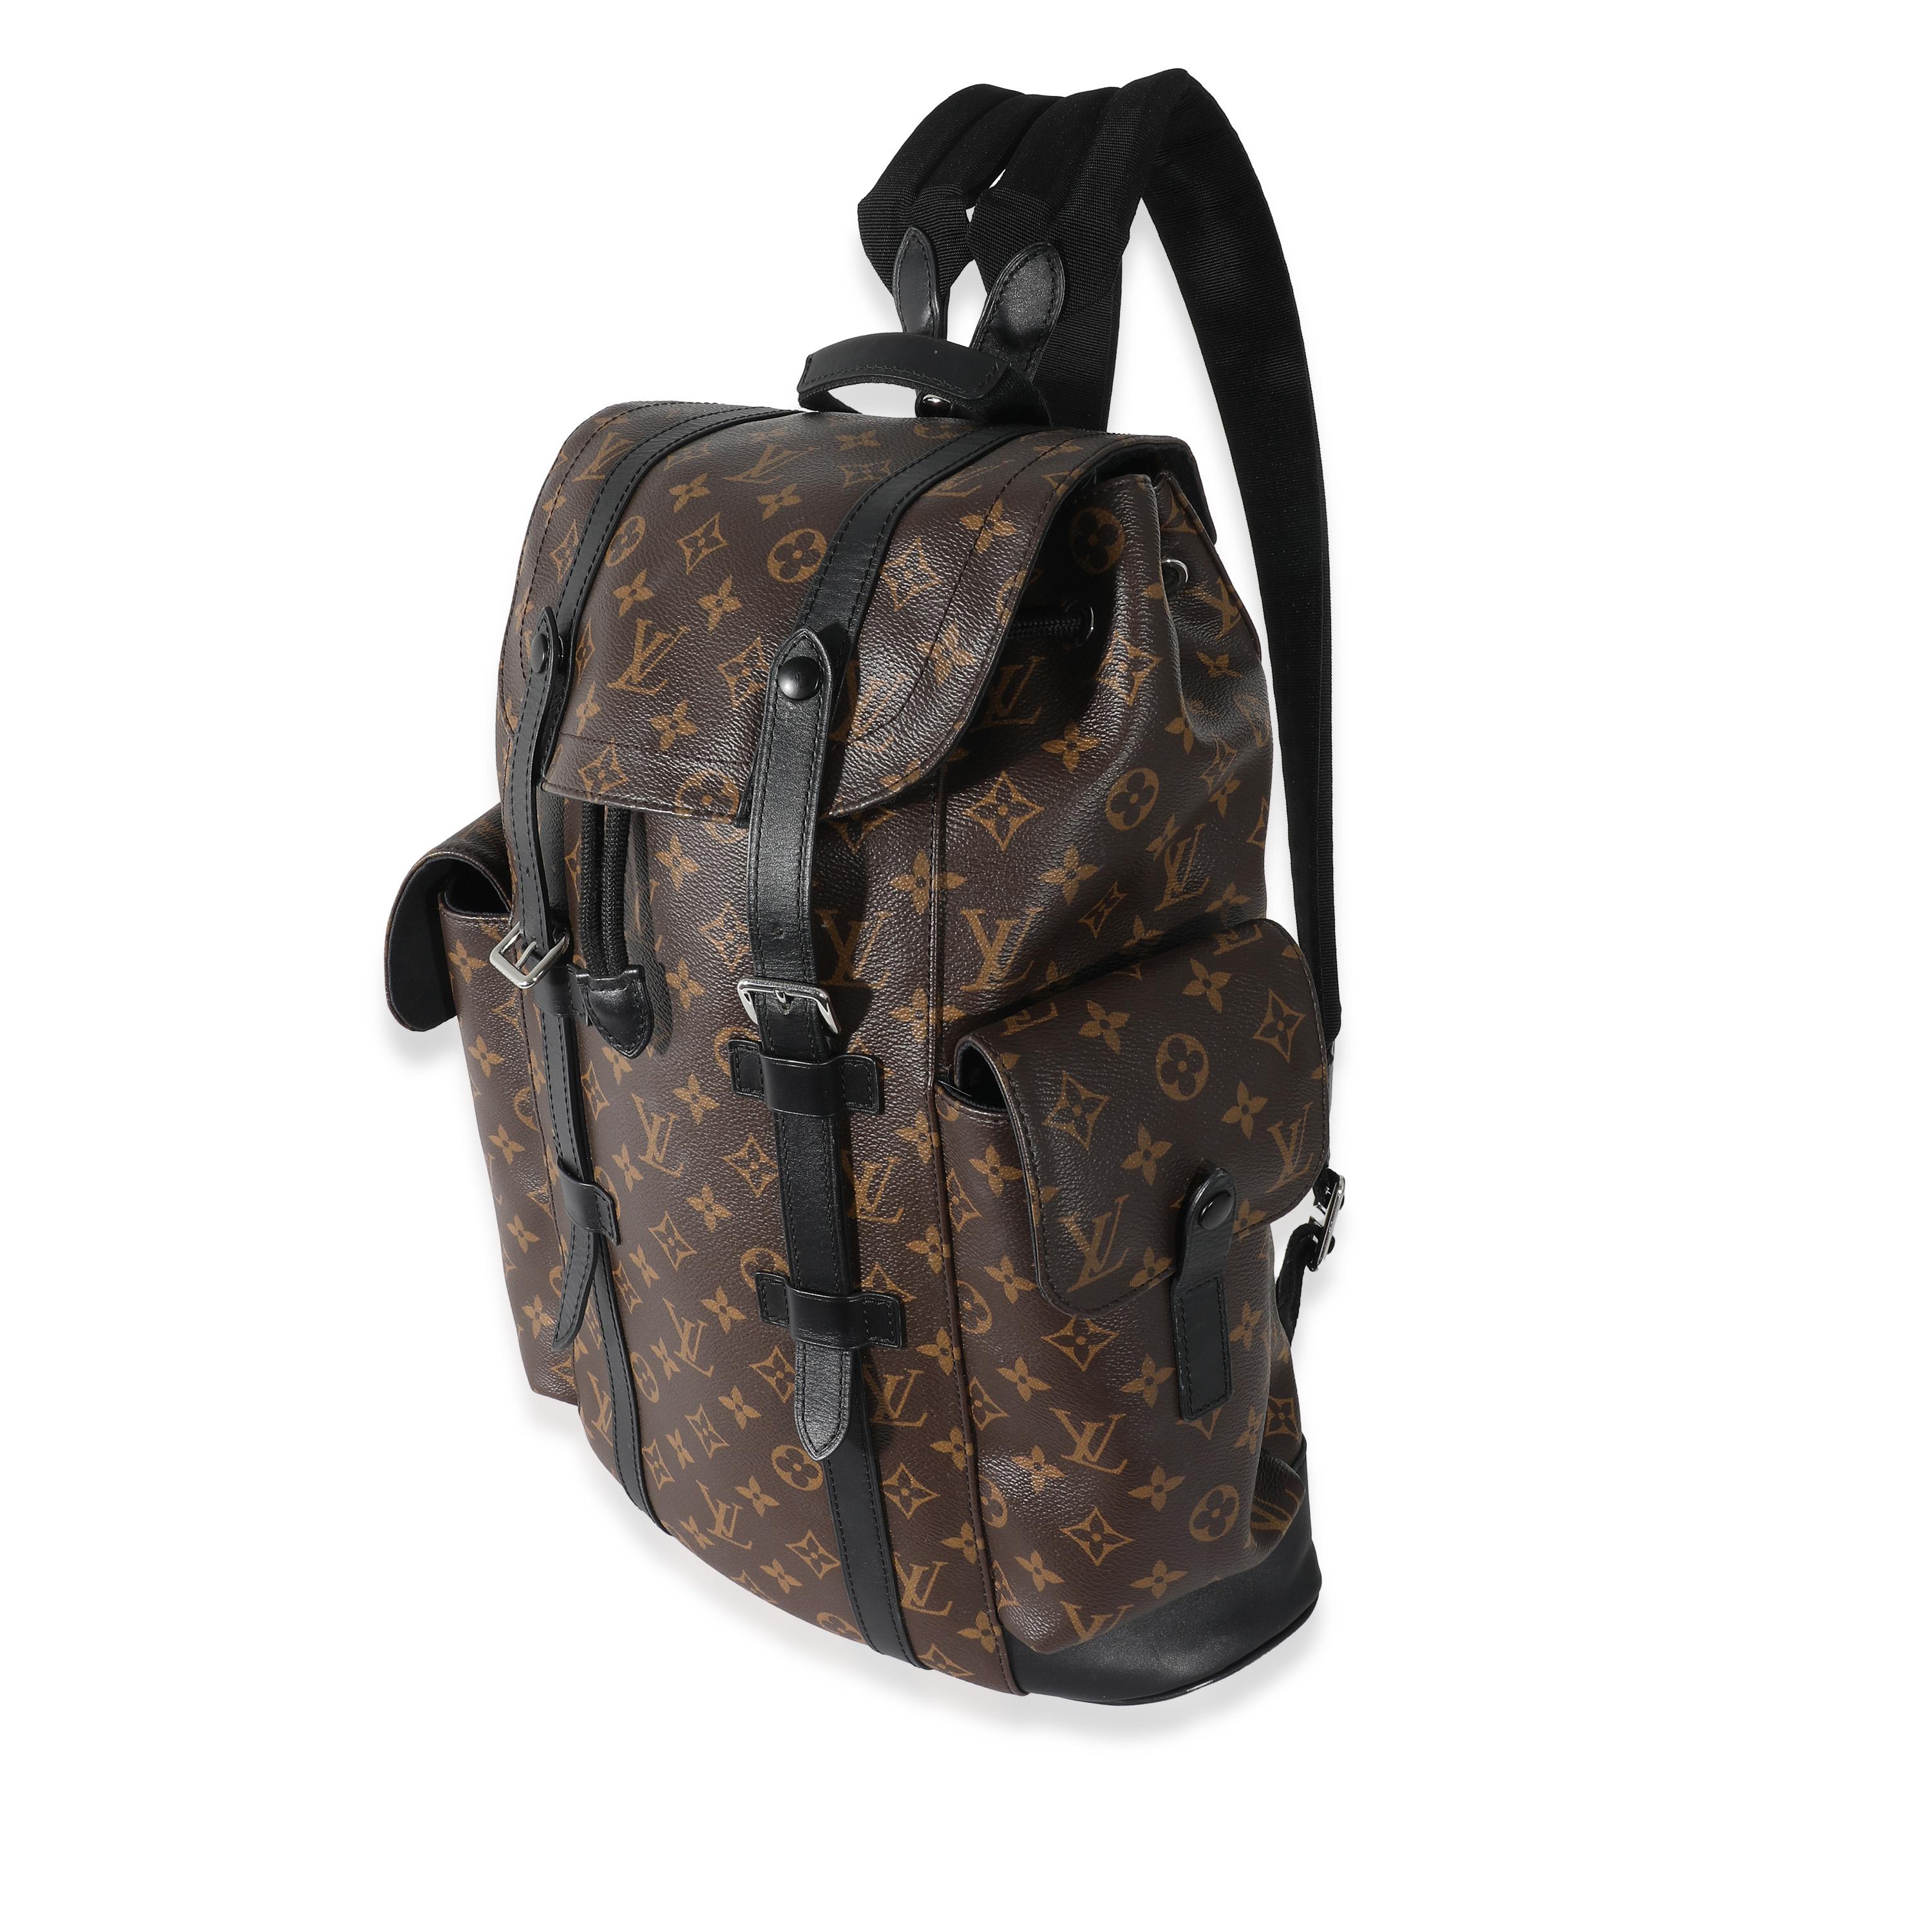 Louis Vuitton Monogram Canvas Macassar Christopher Backpack In Excellent Condition For Sale In New York, NY